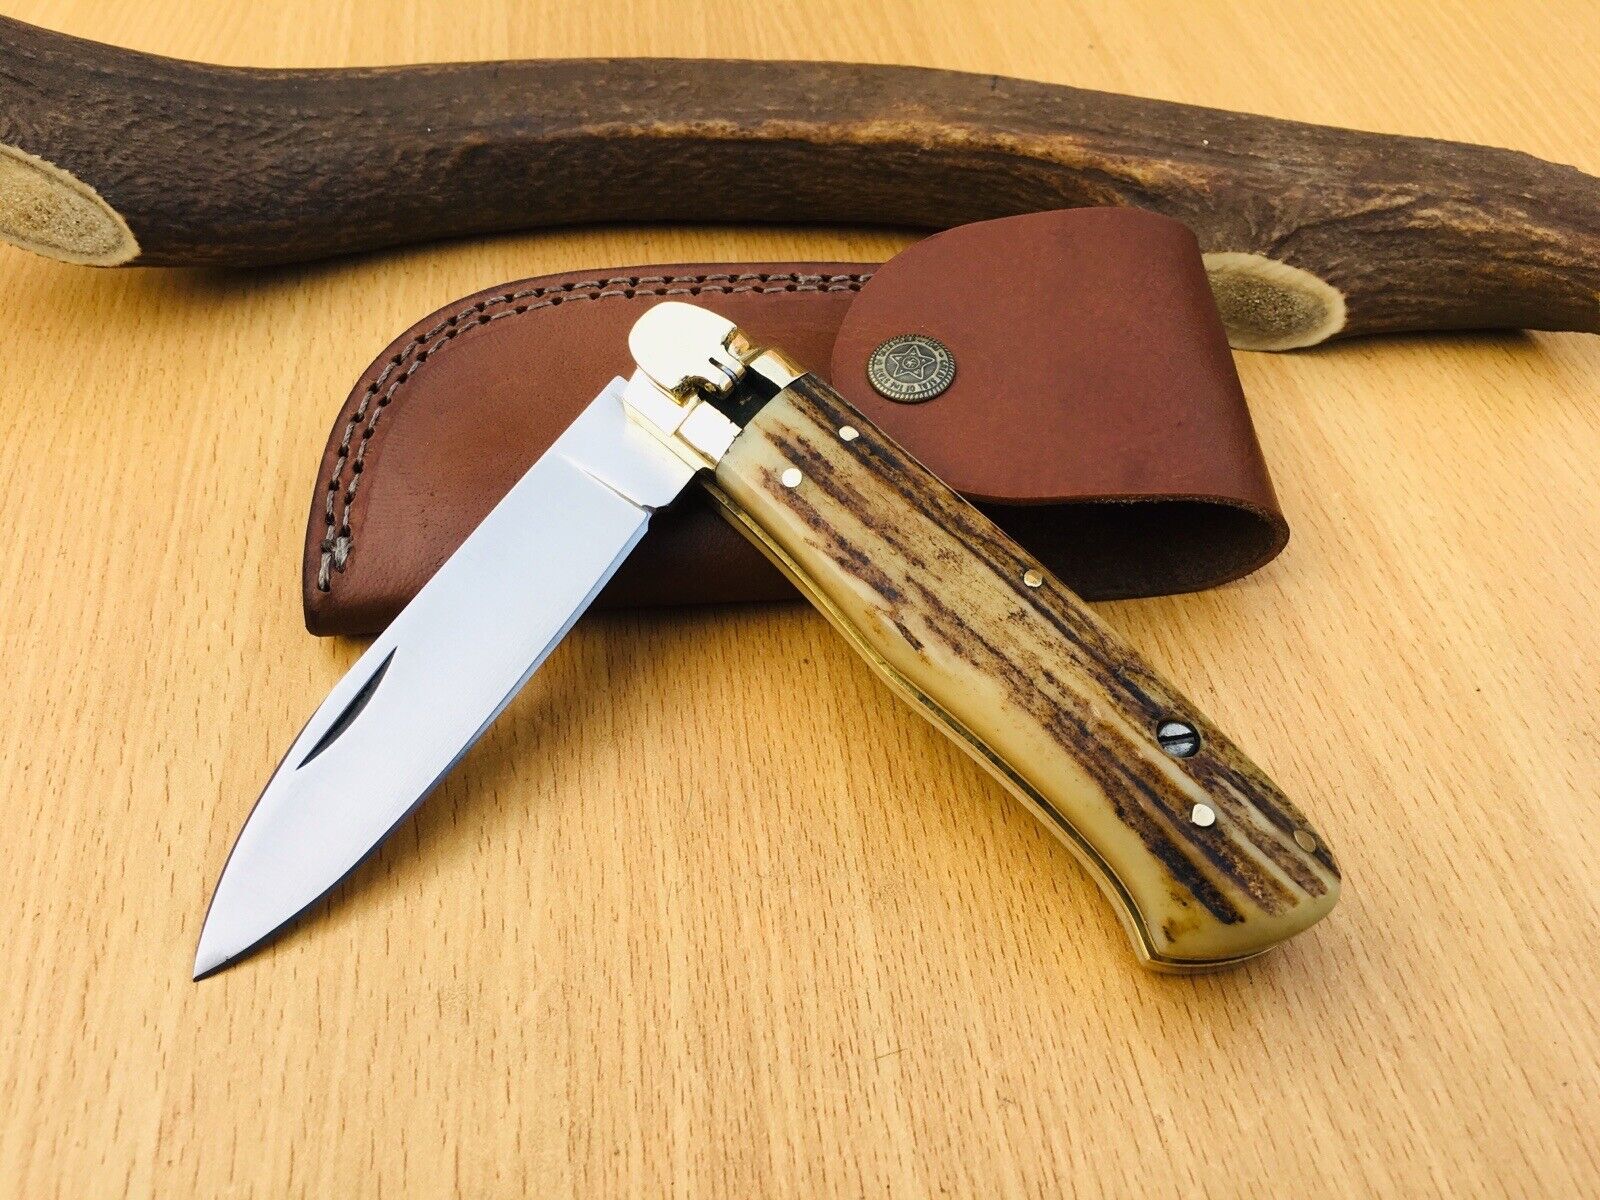 BS-1985 HANDMADE PUSH BUTTON SPRING ASSISTED LOCK FOLDING KNIFE WITH DEER ANTLER